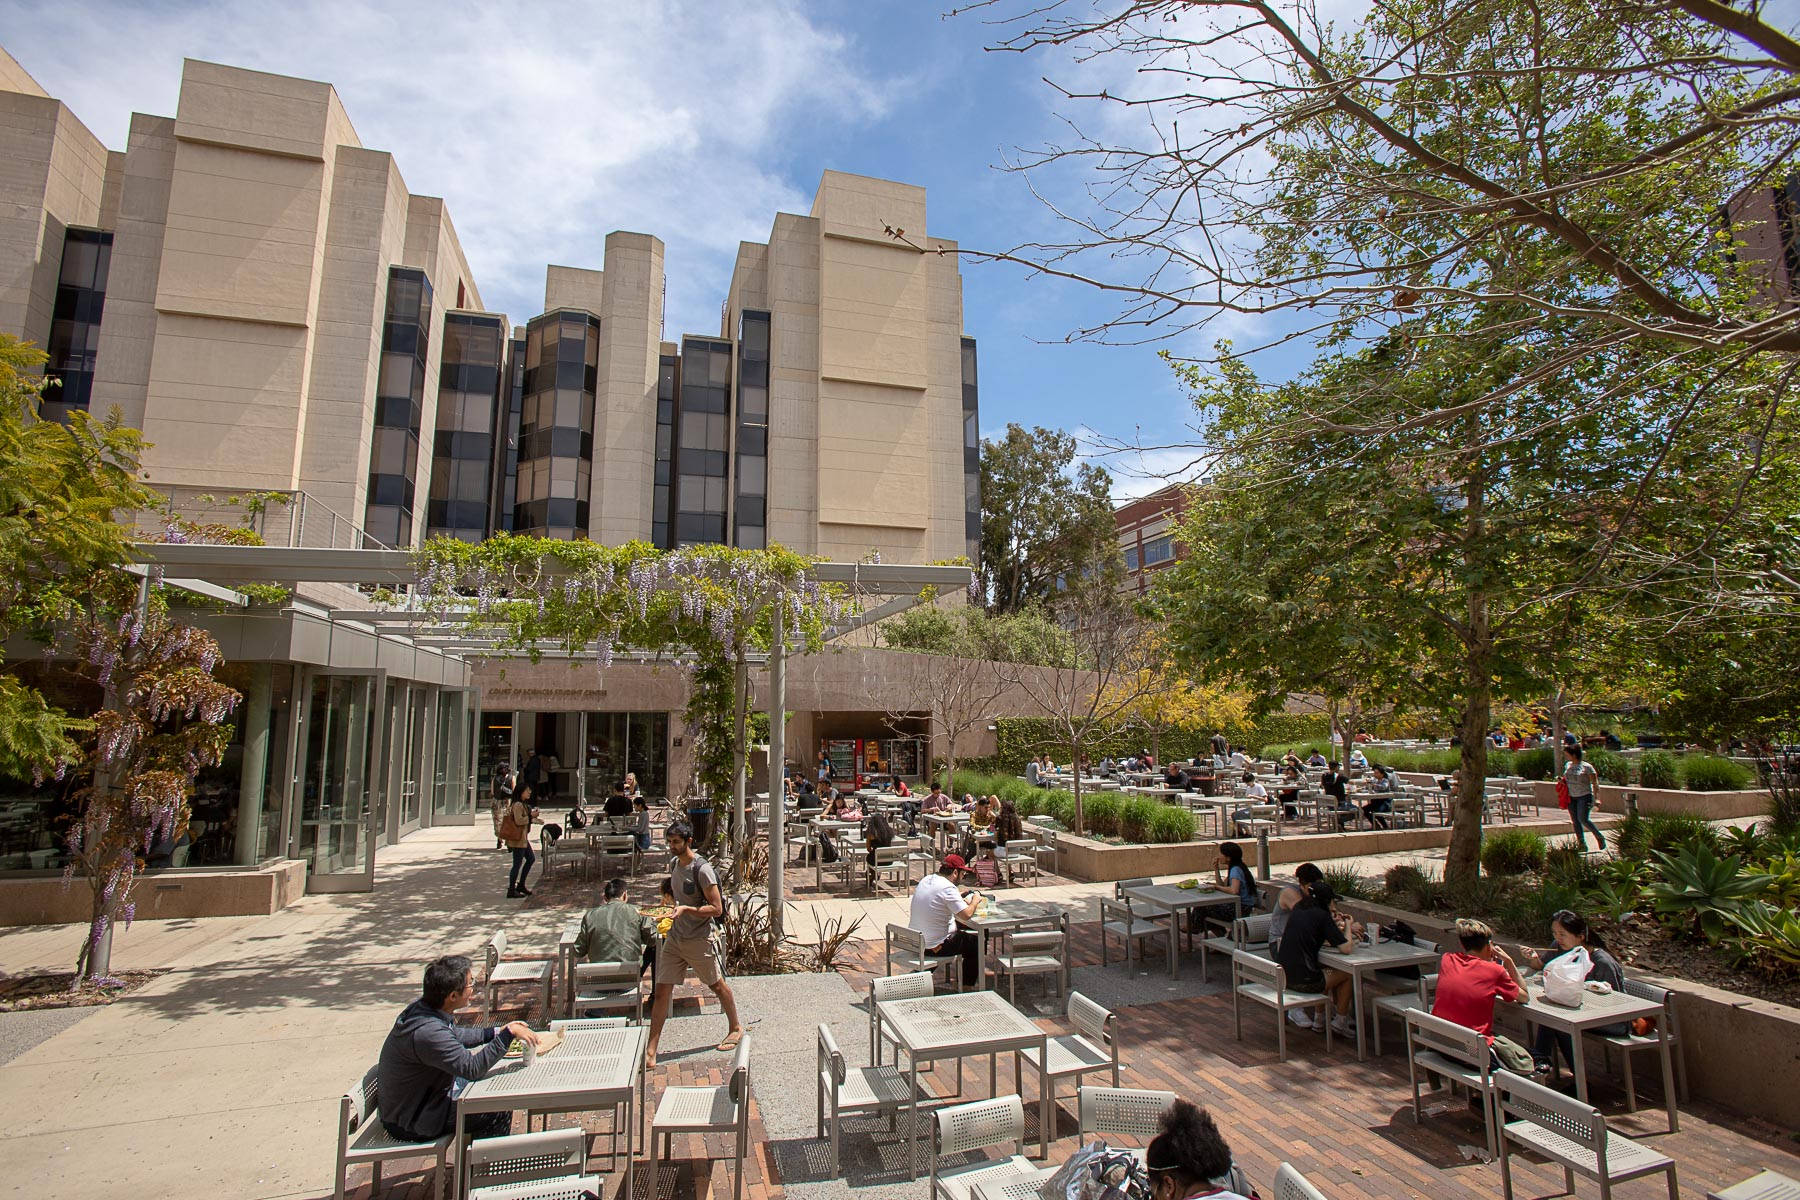 Students Lounging Outdoors At UCLA Wallpaper